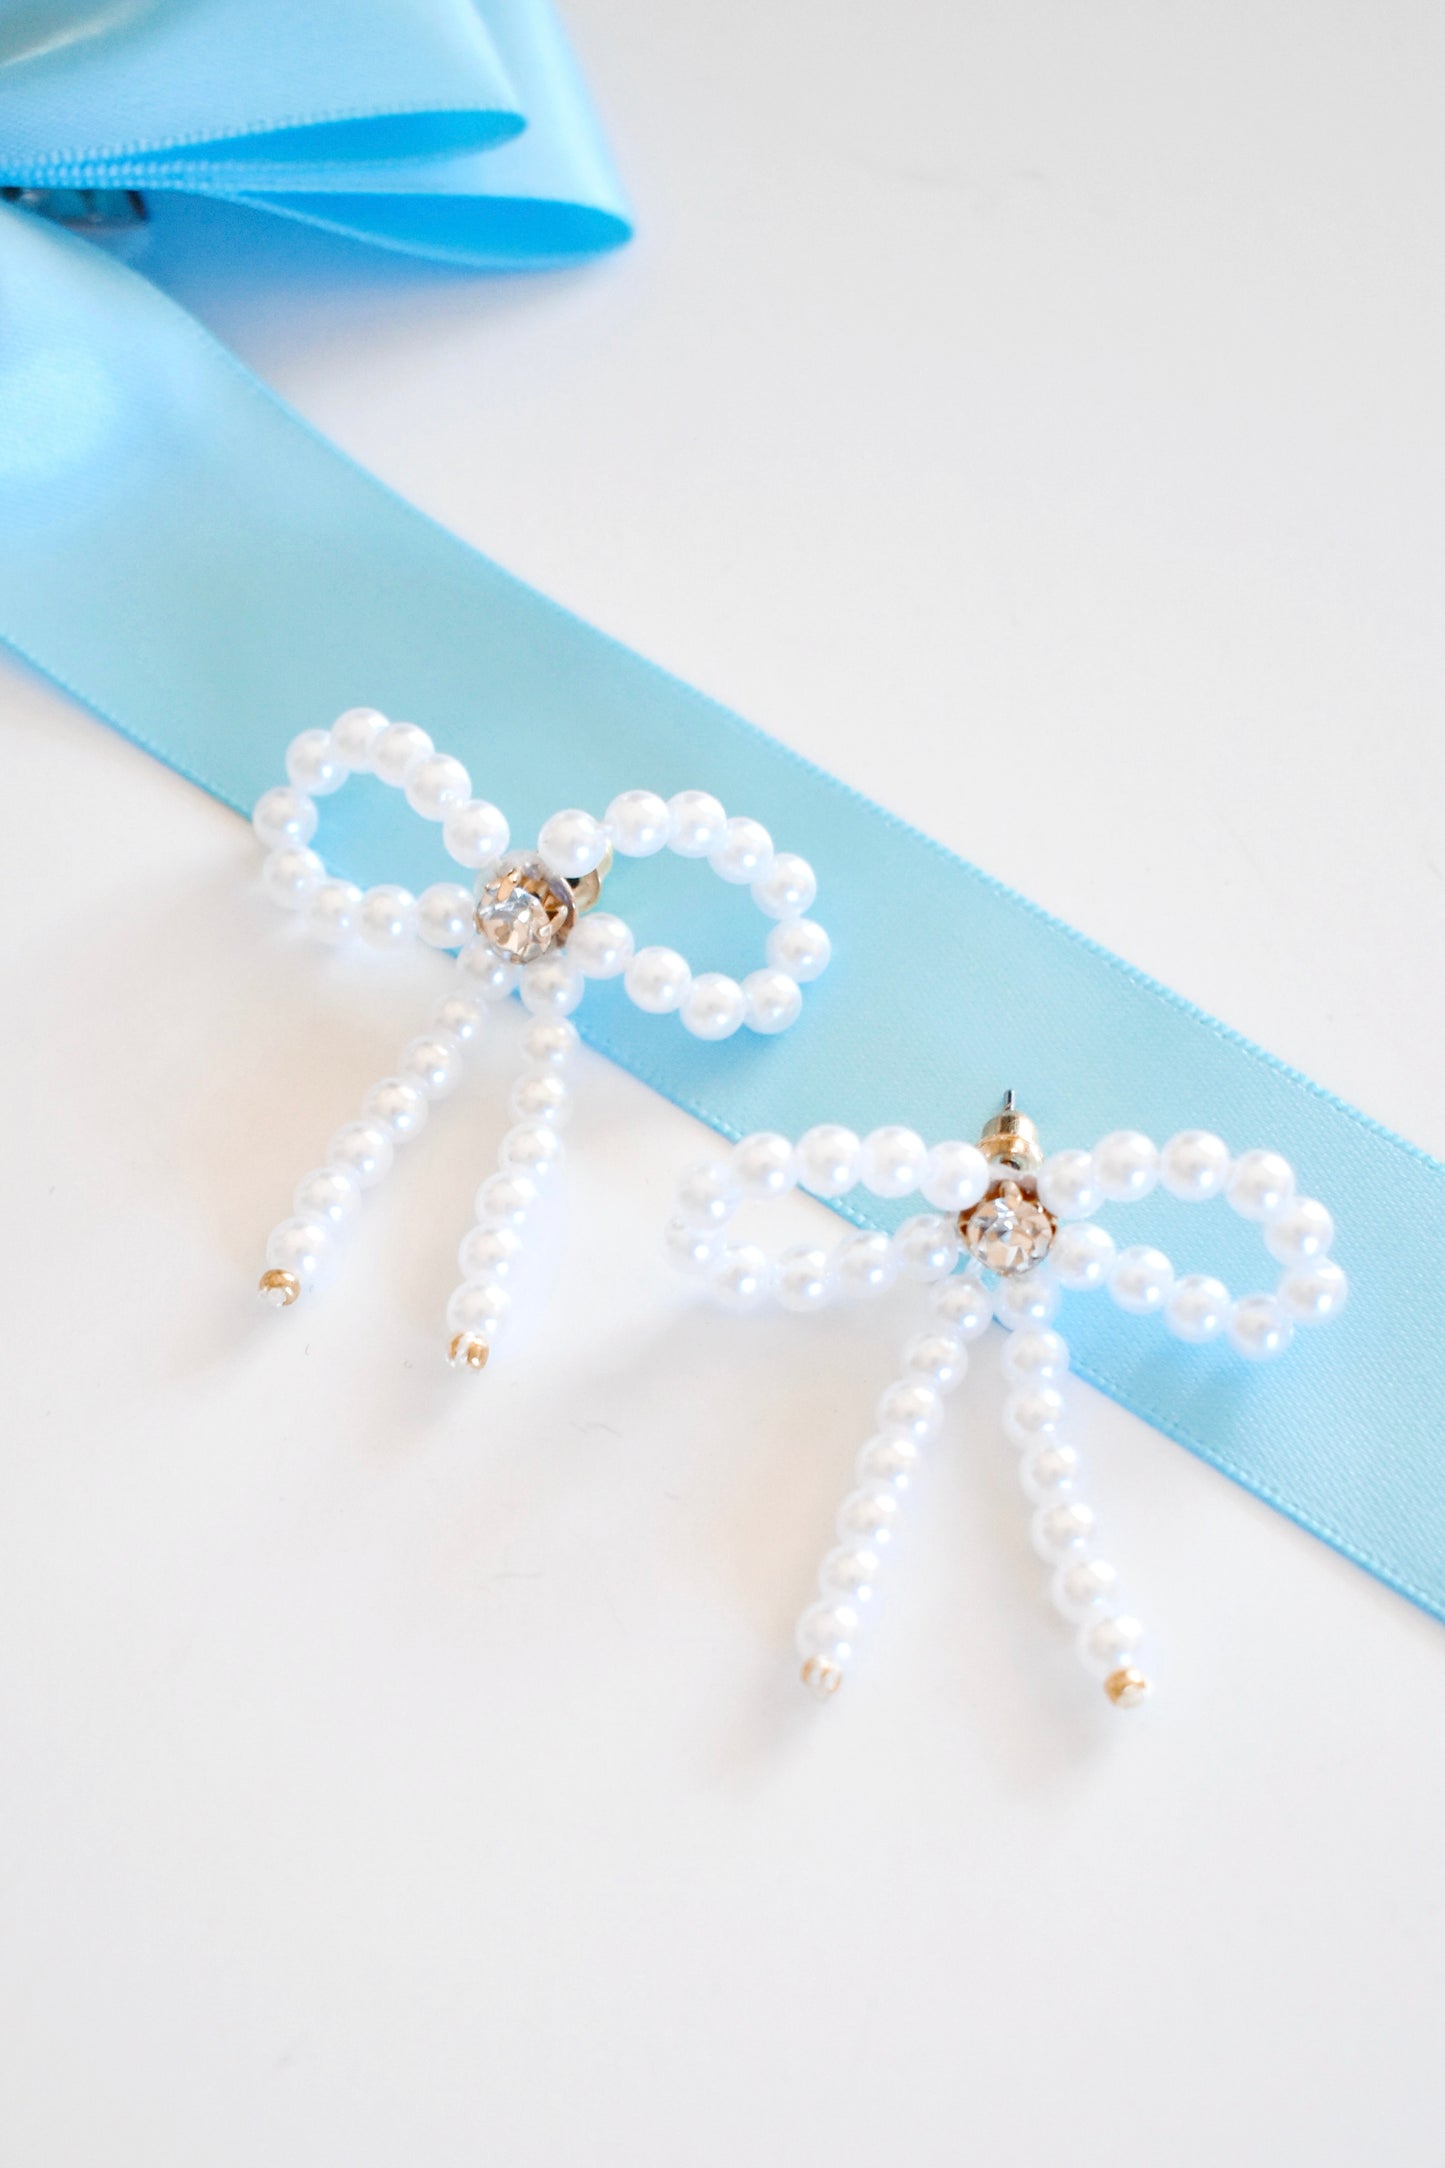 Load image into Gallery viewer, Pearl Bow Earrings
